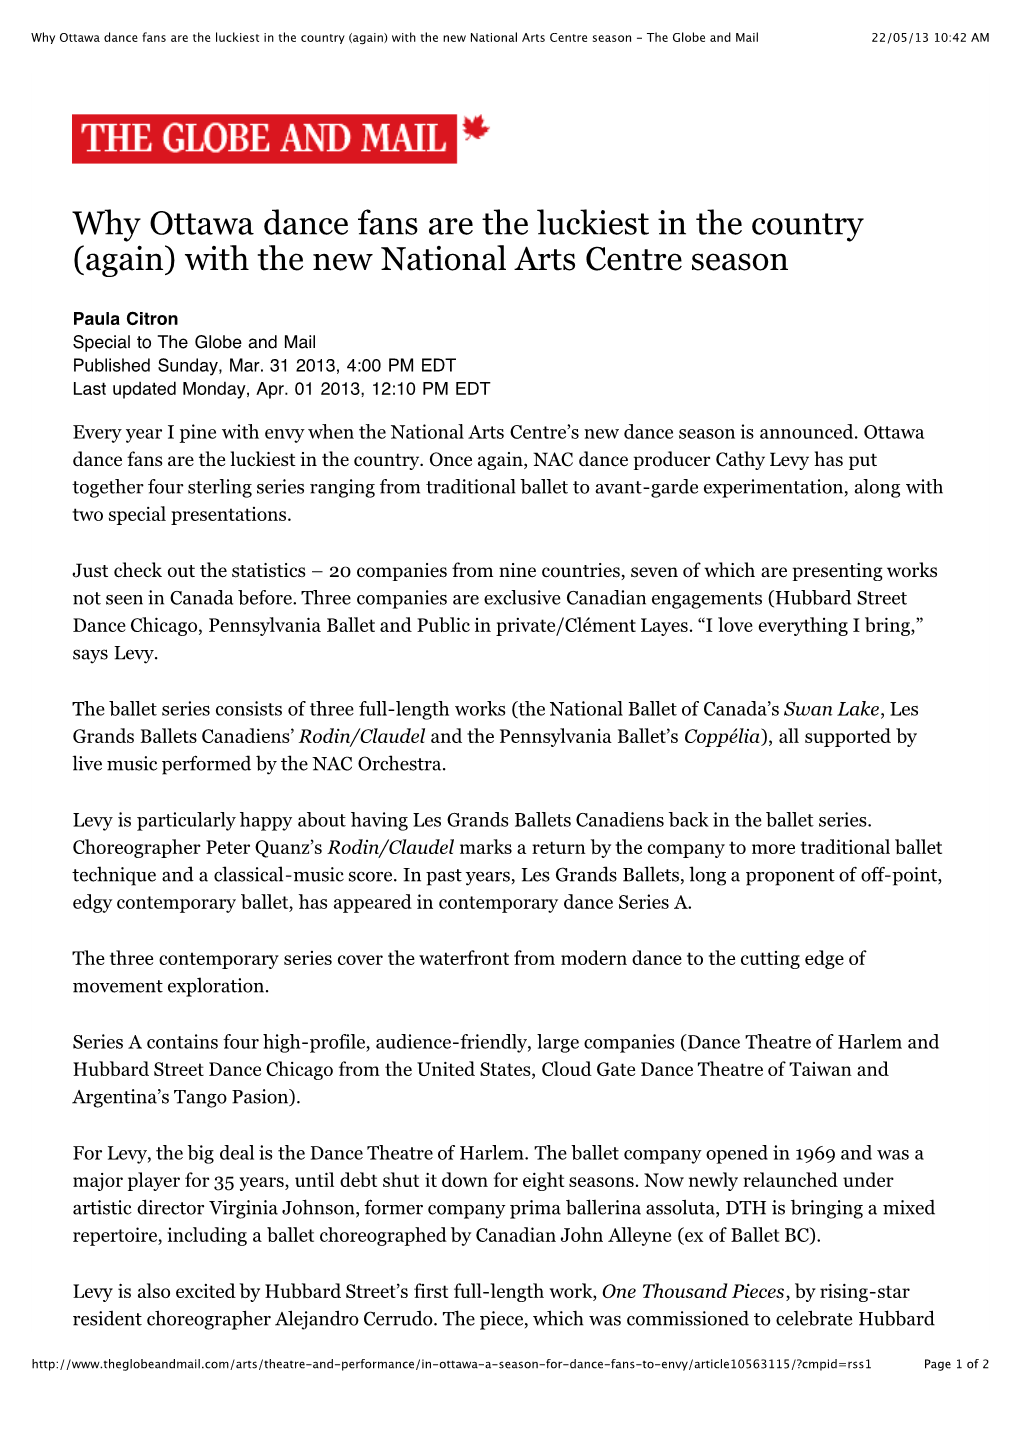 Why Ottawa Dance Fans Are the Luckiest in the Country (Again) with the New National Arts Centre Season - the Globe and Mail 22/05/13 10:42 AM